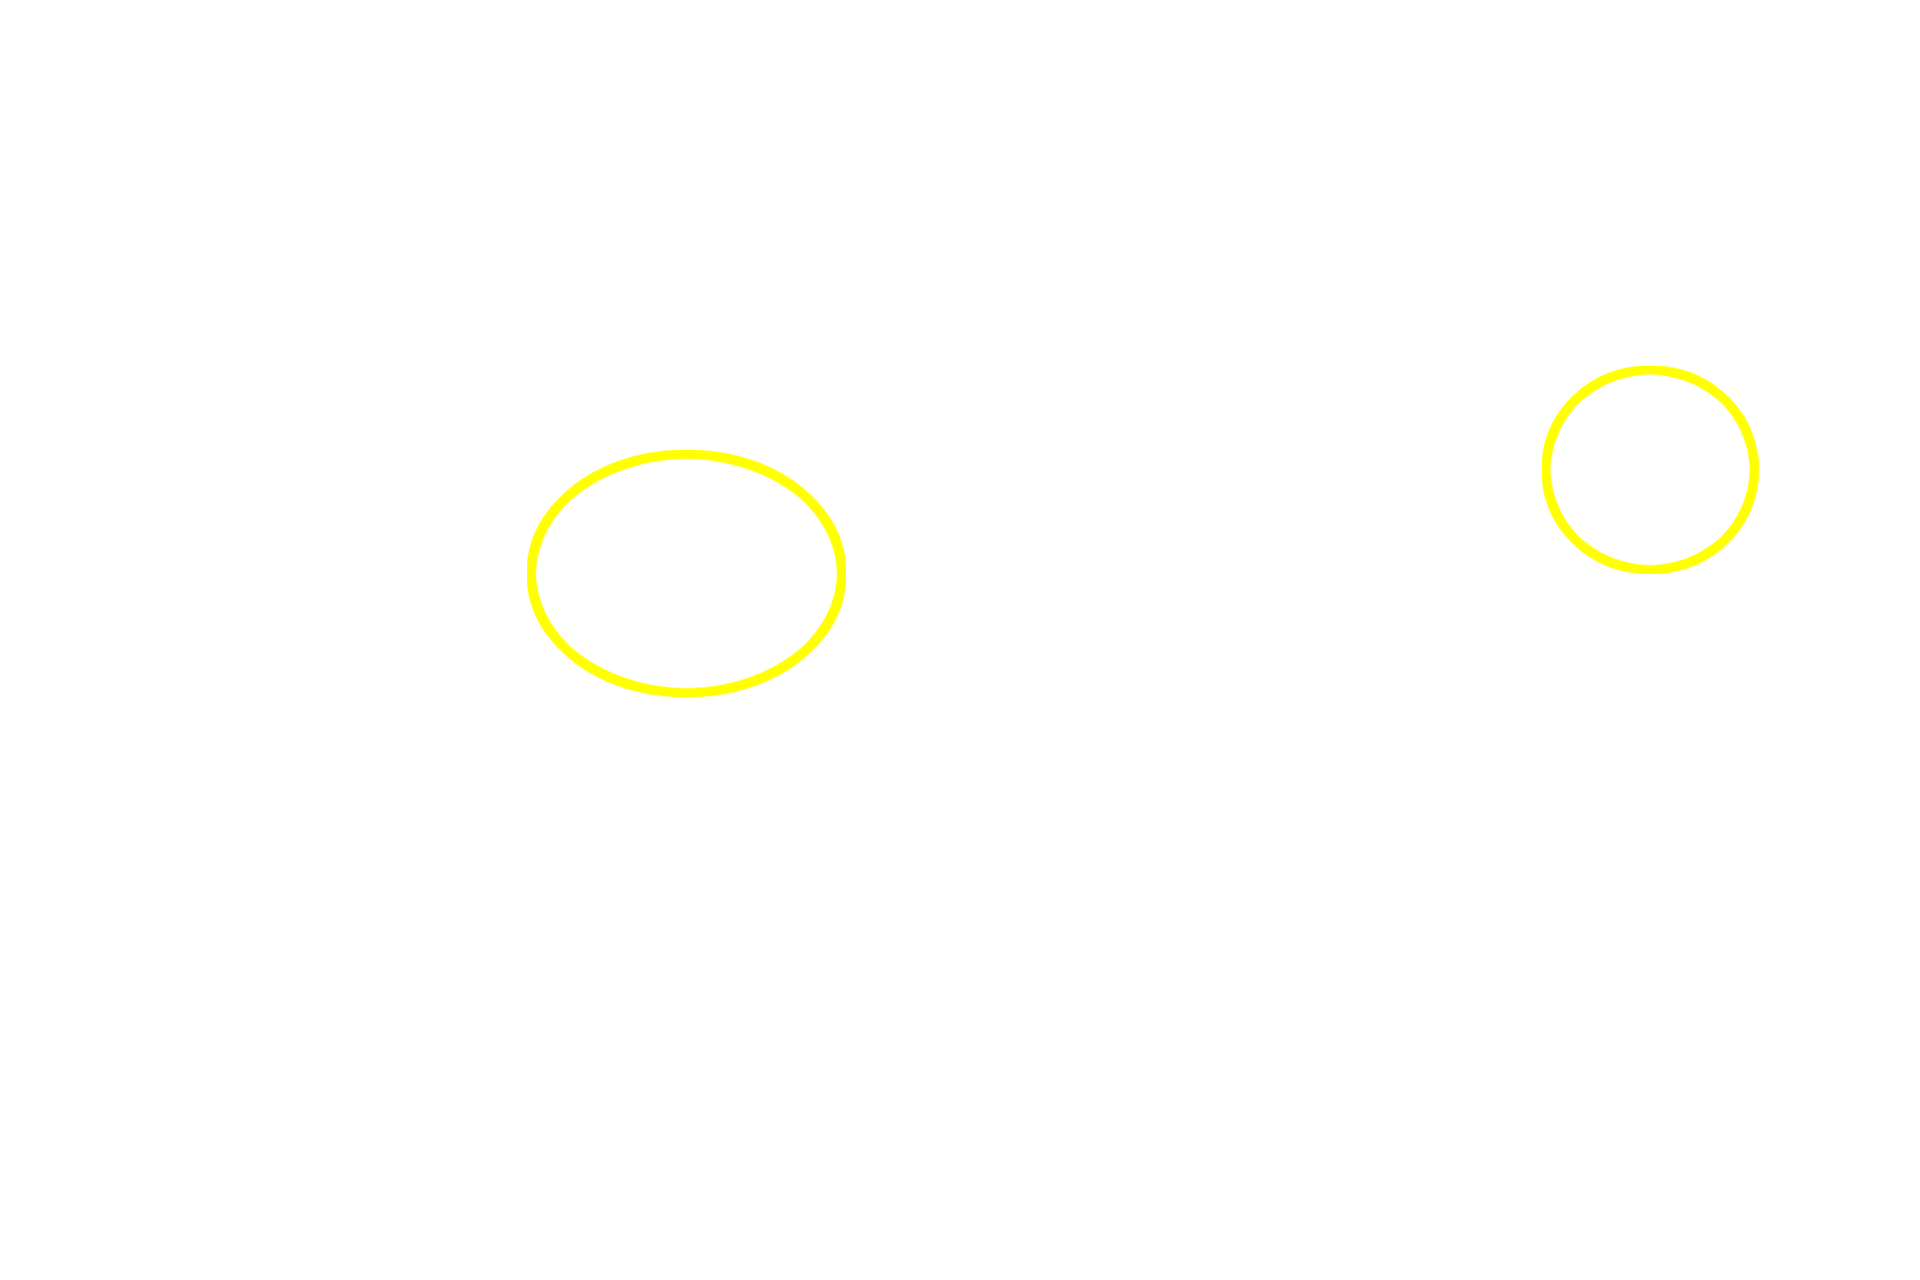 Nuclei (location) <p>Three fibroblasts in culture were stained with fluorescently-labeled phalloidin, which specifically binds to actin, the protein that makes up microfilaments.  In these cells, microfilaments form stress fibers that form a complex network throughout the cytoplasm to provide support for the cell and its processes.  The filaments outline the position of the nucleus.  Microfilaments are also concentrated beneath the plasma membrane.  800x</p>
